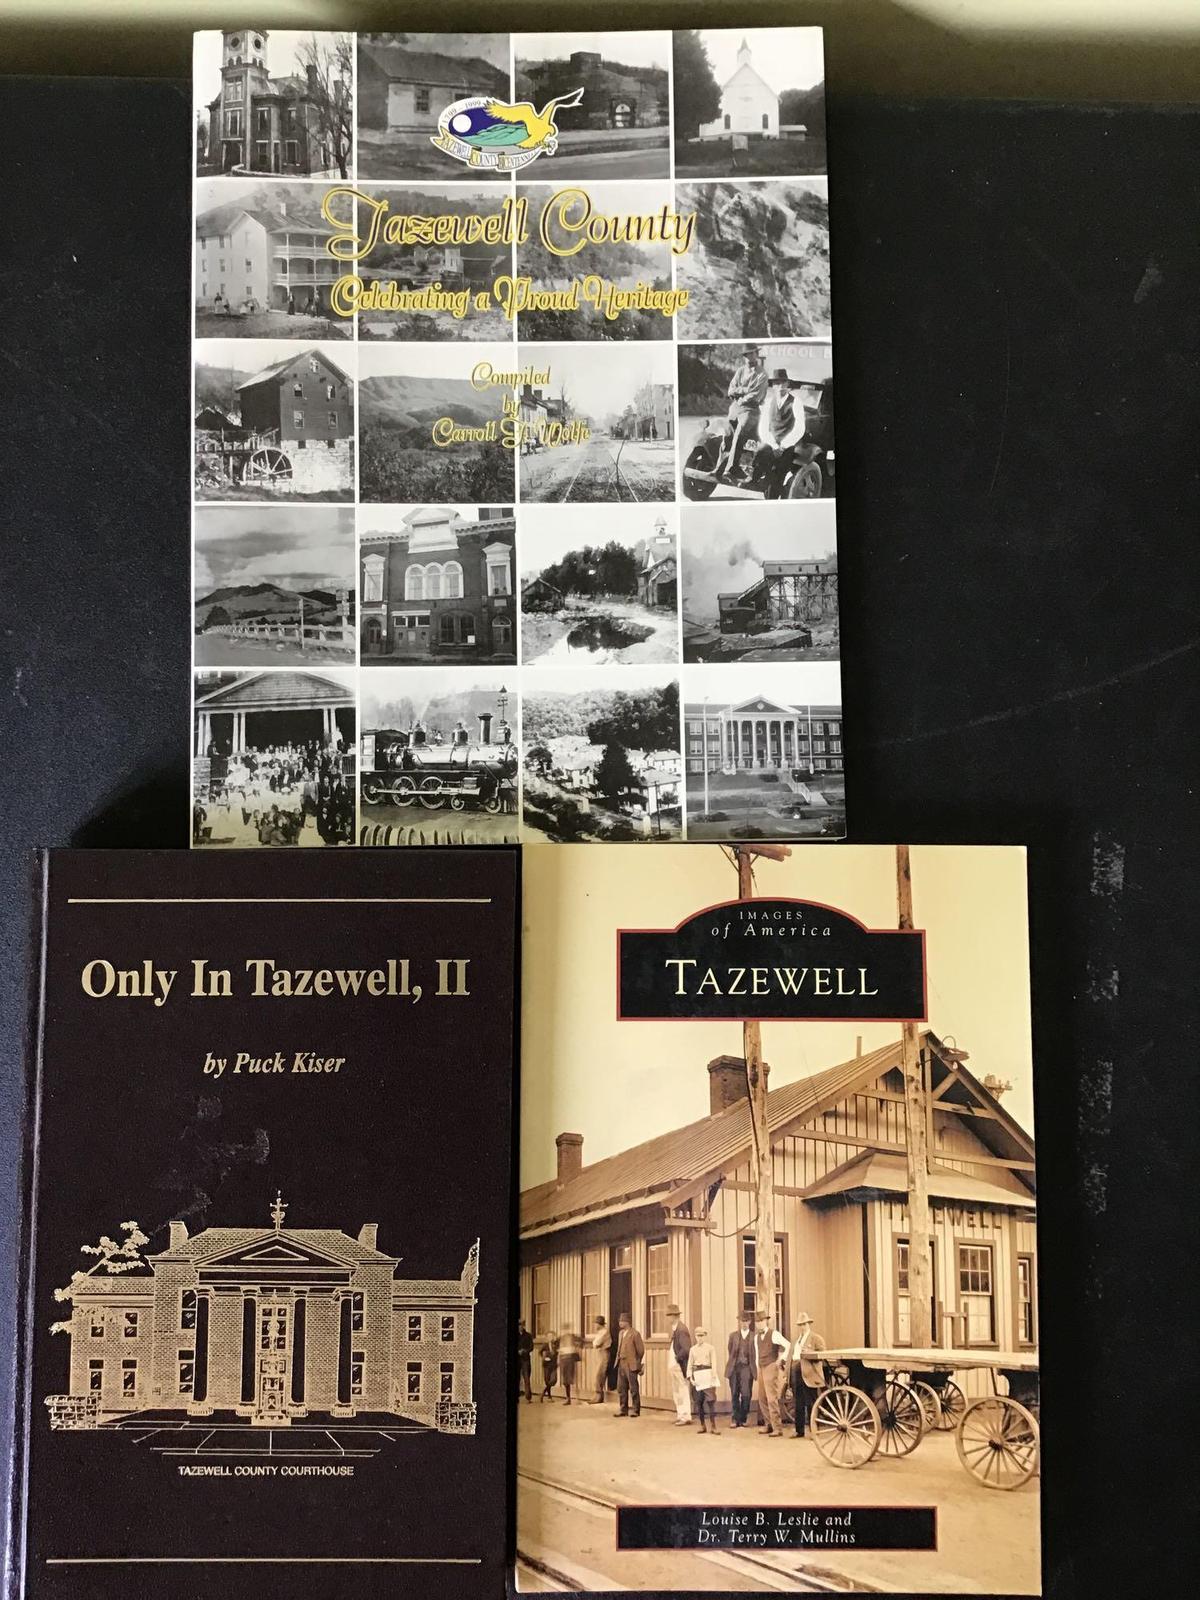 Tazewell county history books